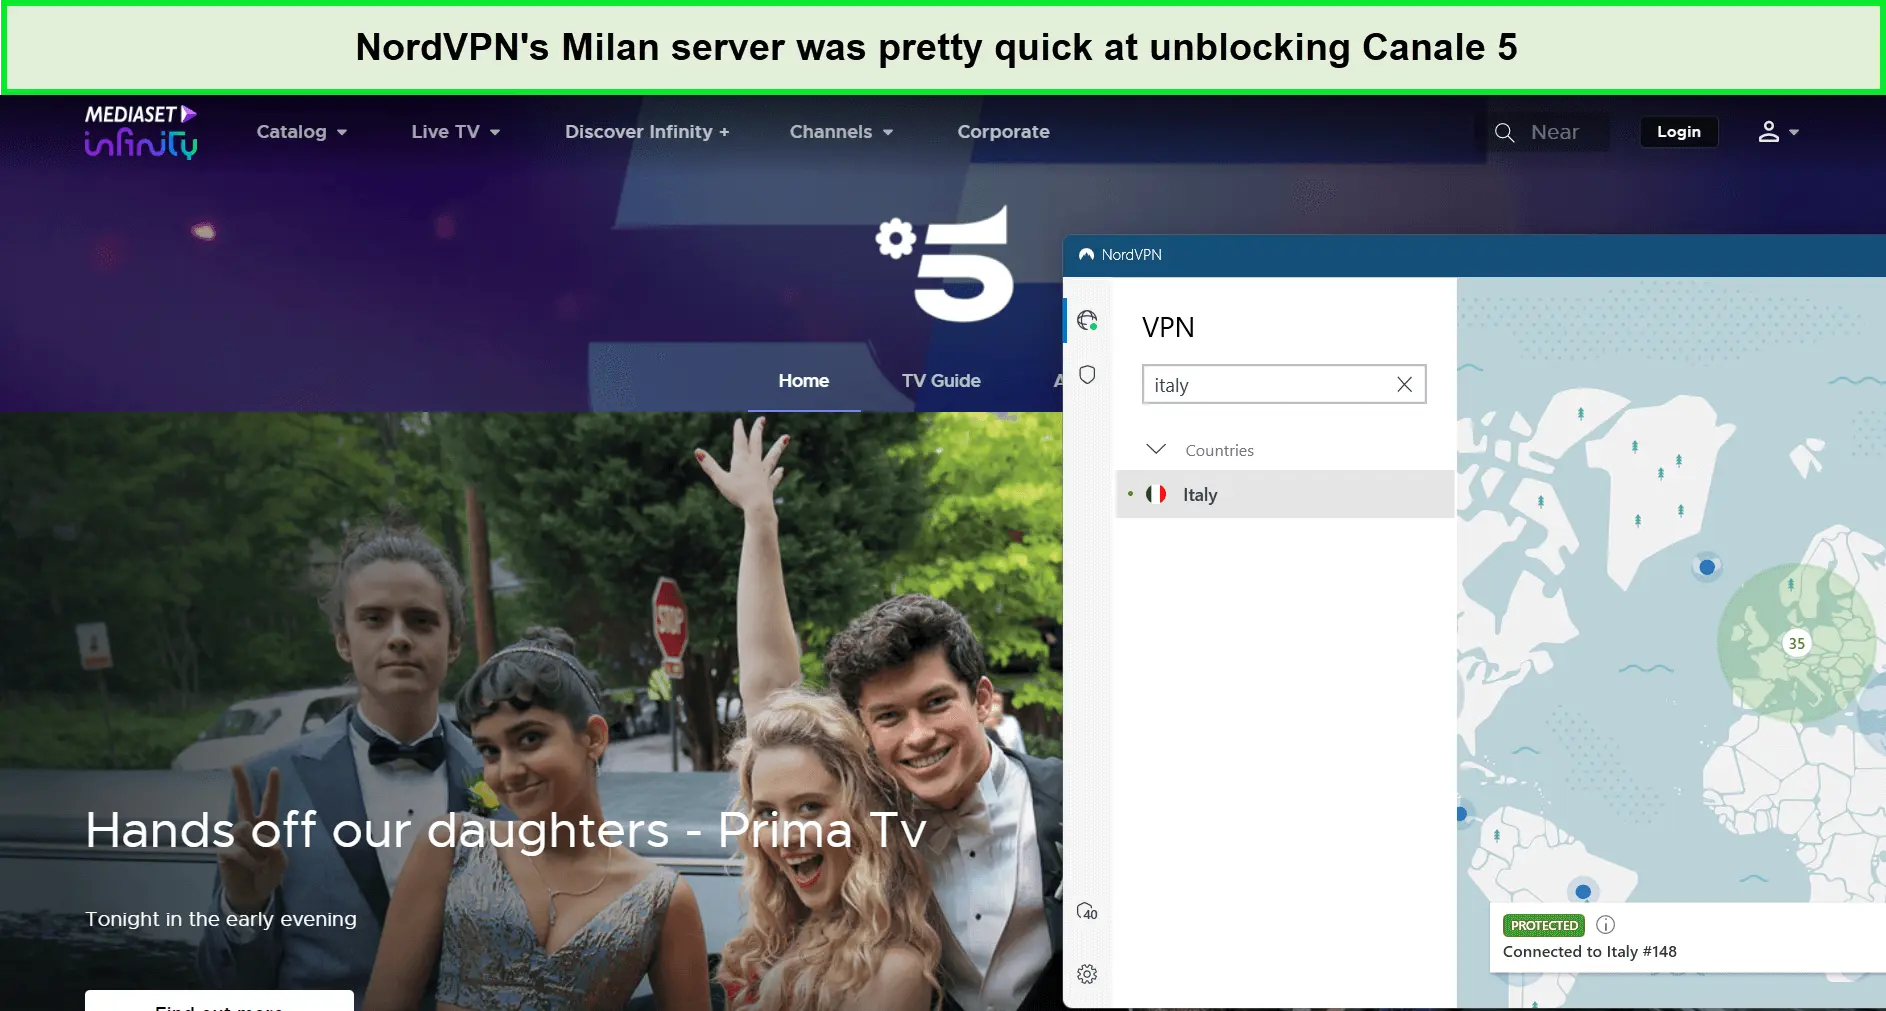 nordvpn-unblocked-canale-5-with-in-Italy-servers